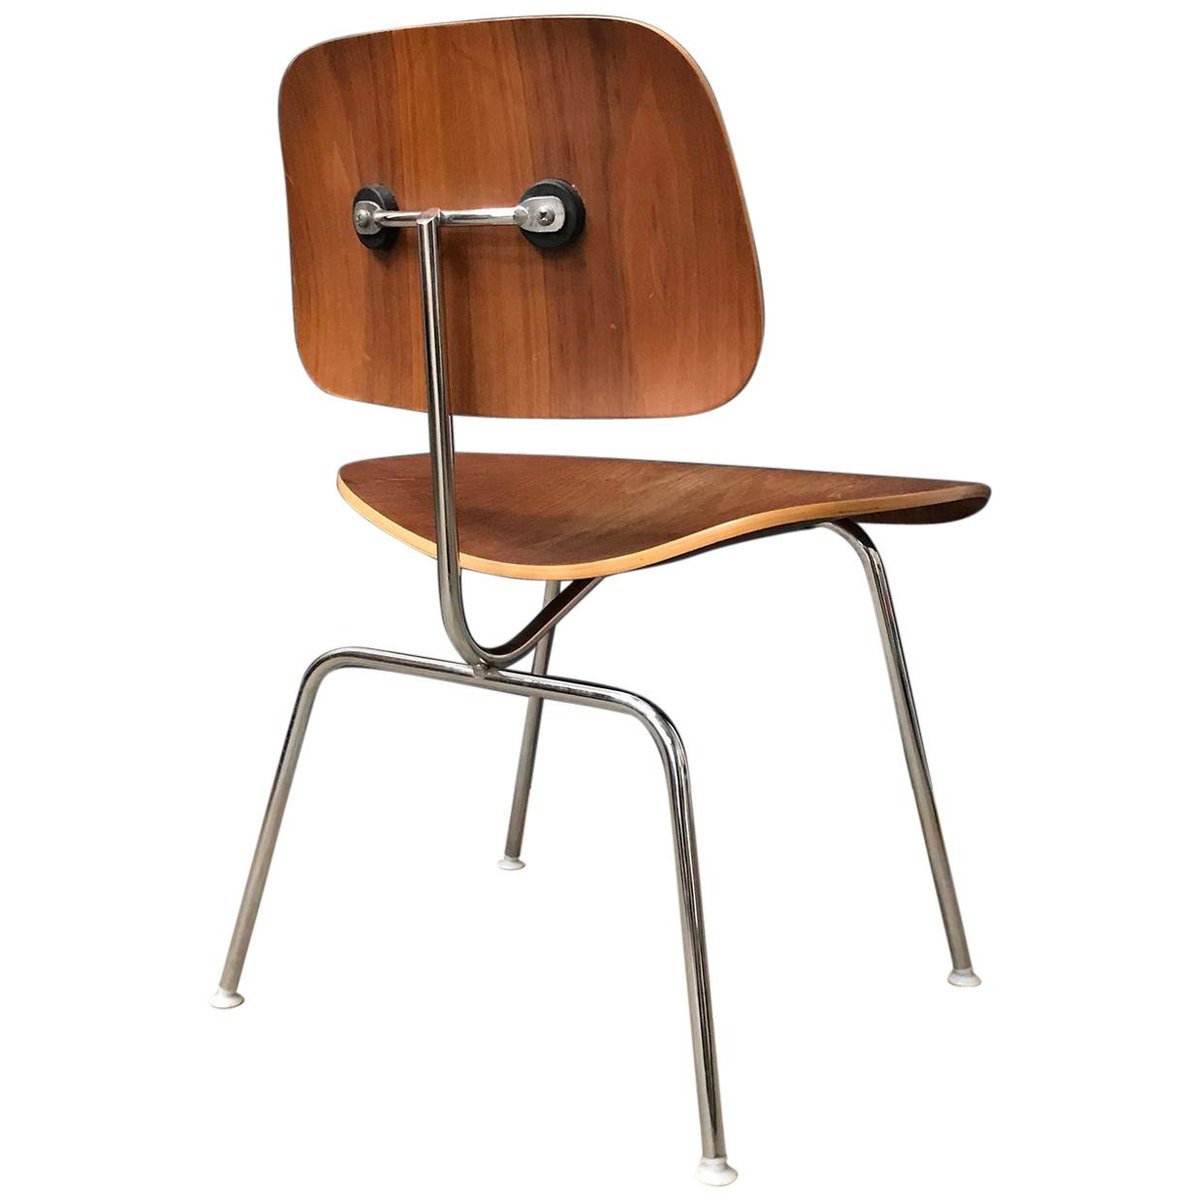 wooden dcm chair by charles and ray eames for herman miller 1940s BO-415775